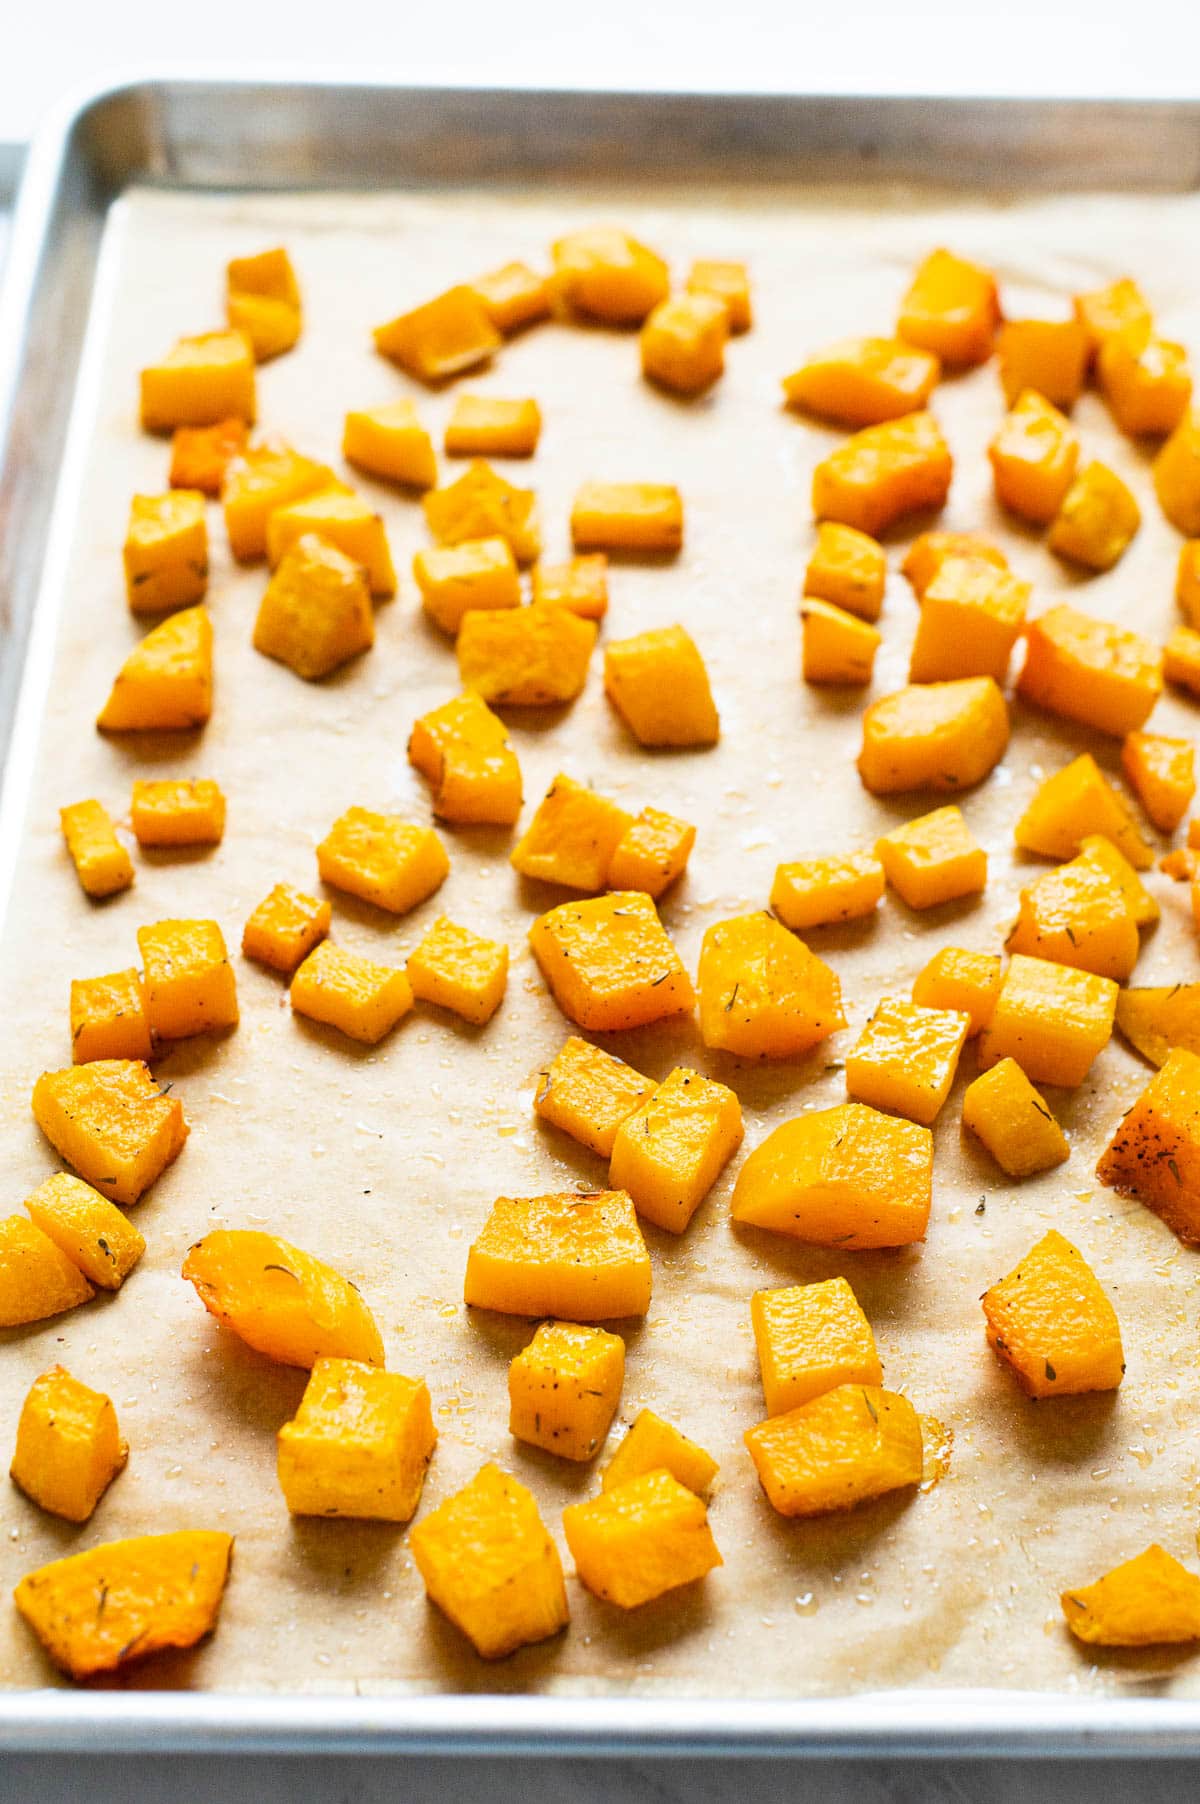 Roasted butternut squash cubes on parchment lined baking sheet.